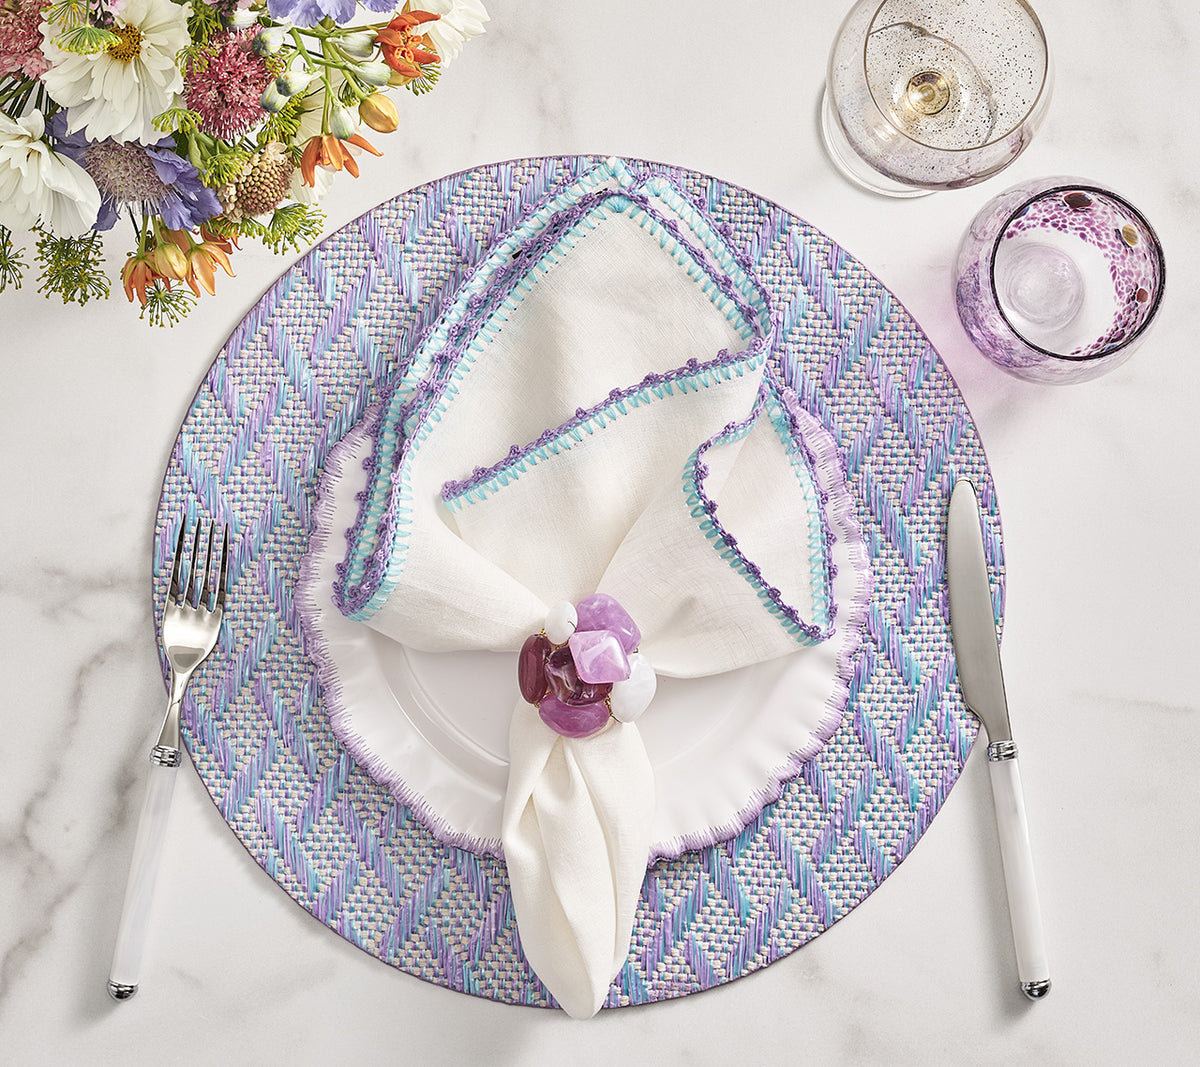 Round Basketweave Placemat in blue and lilac 